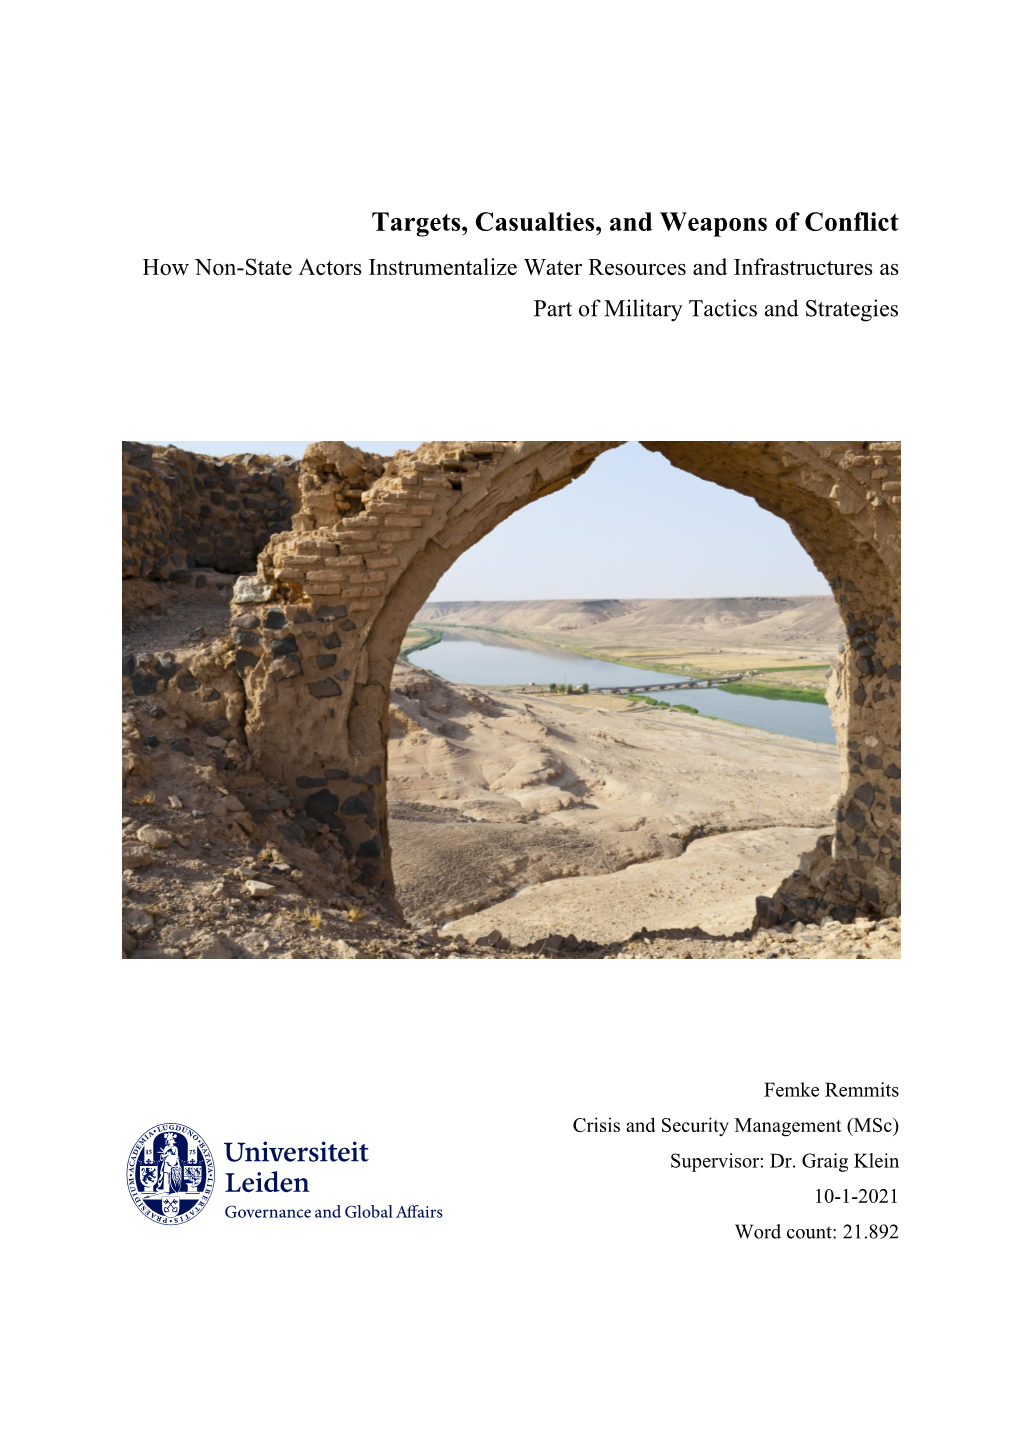 Targets, Casualties, and Weapons of Conflict How Non-State Actors Instrumentalize Water Resources and Infrastructures As Part of Military Tactics and Strategies